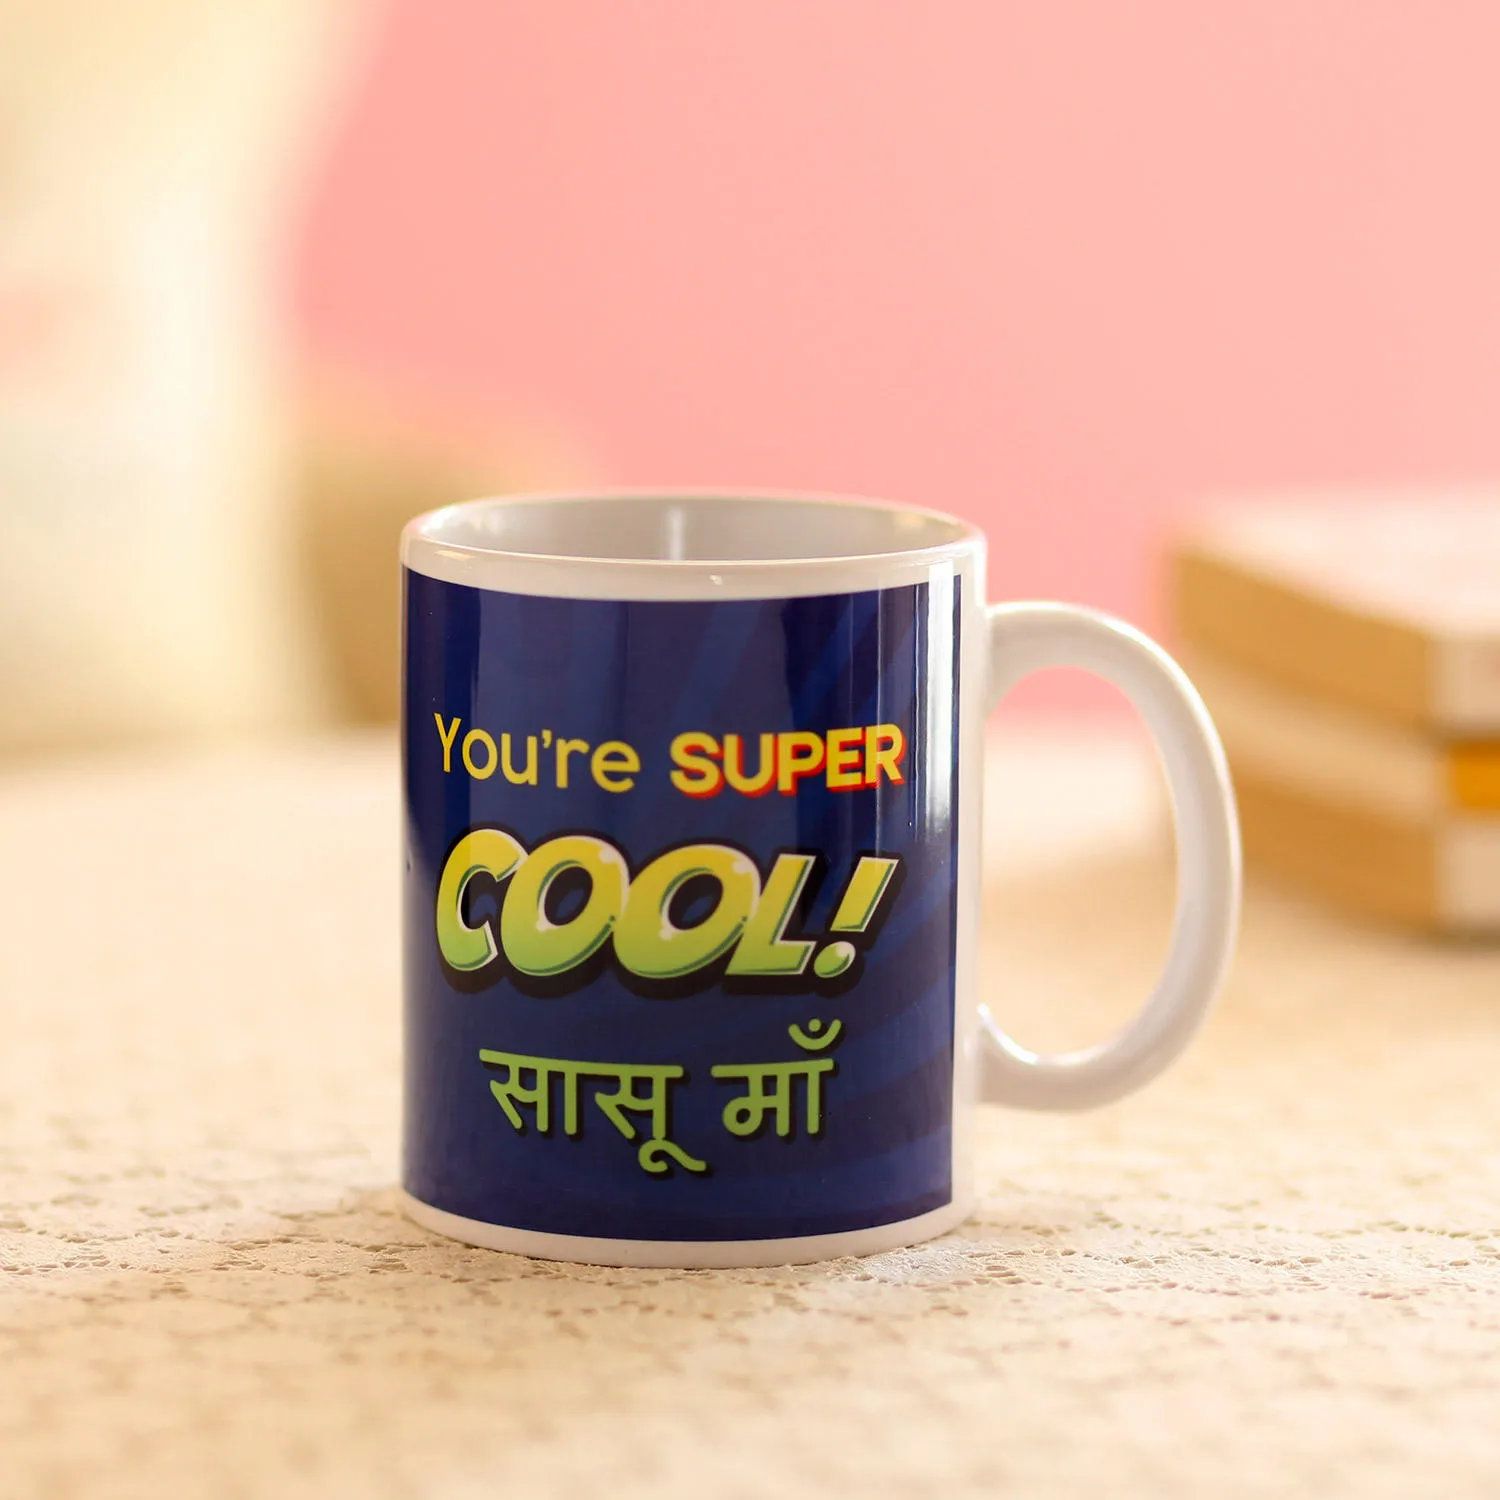 Buy Family Shoping Mother's Day Gifts Mother in Law, You're One Cool Sasu  Maa Coffee Mug for Mother-in-Law Online at Low Prices in India - Amazon.in